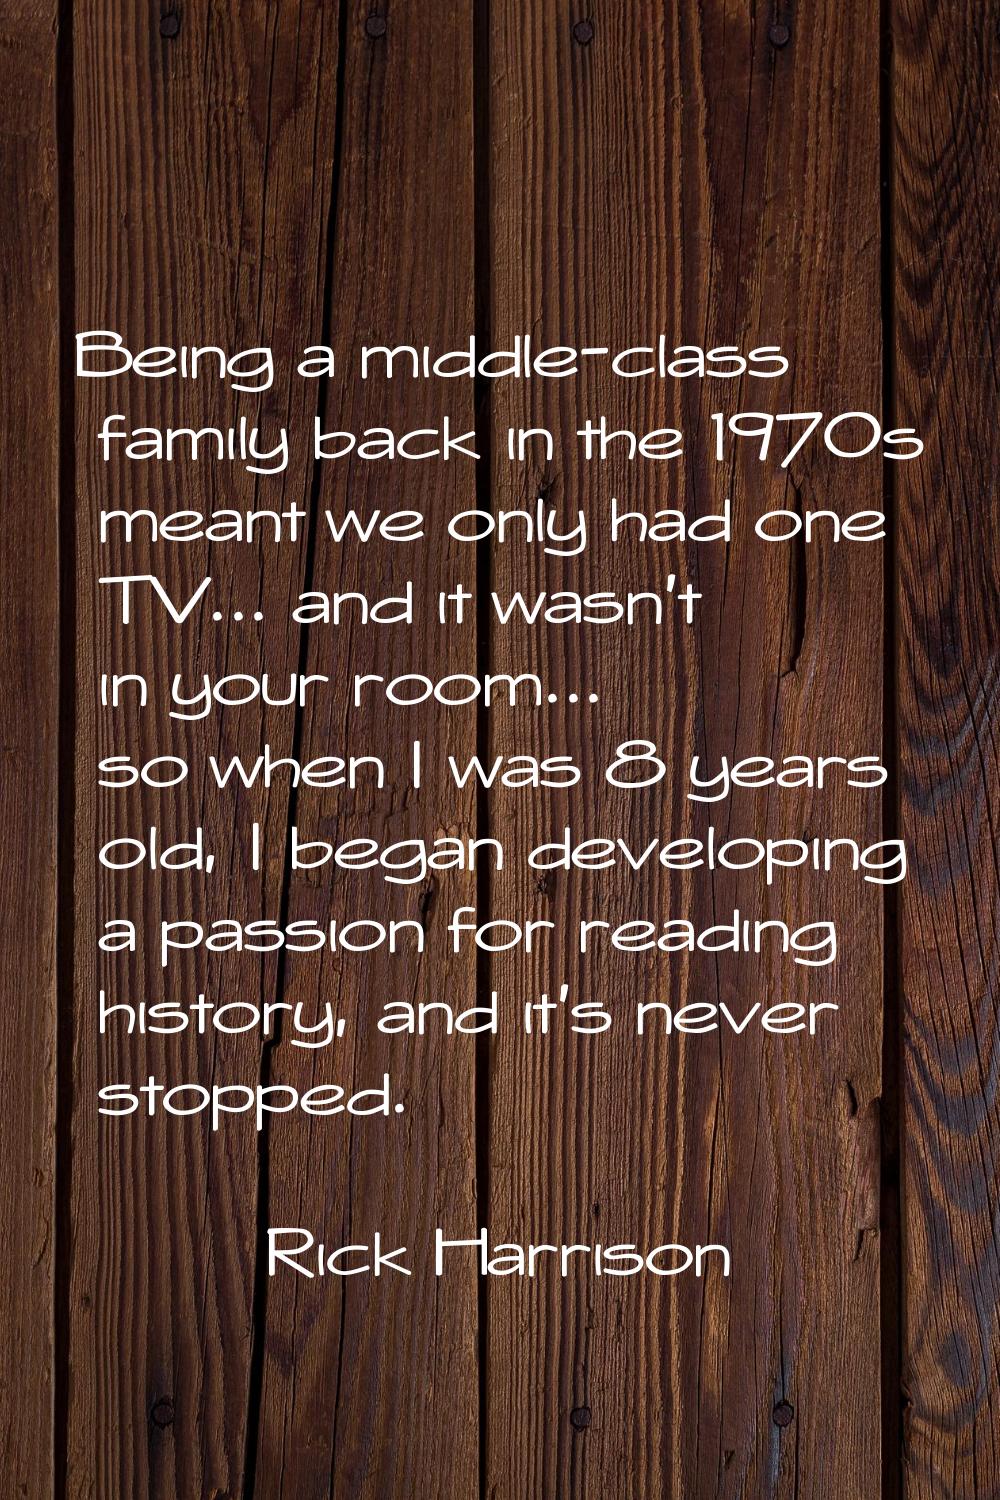 Being a middle-class family back in the 1970s meant we only had one TV... and it wasn't in your roo